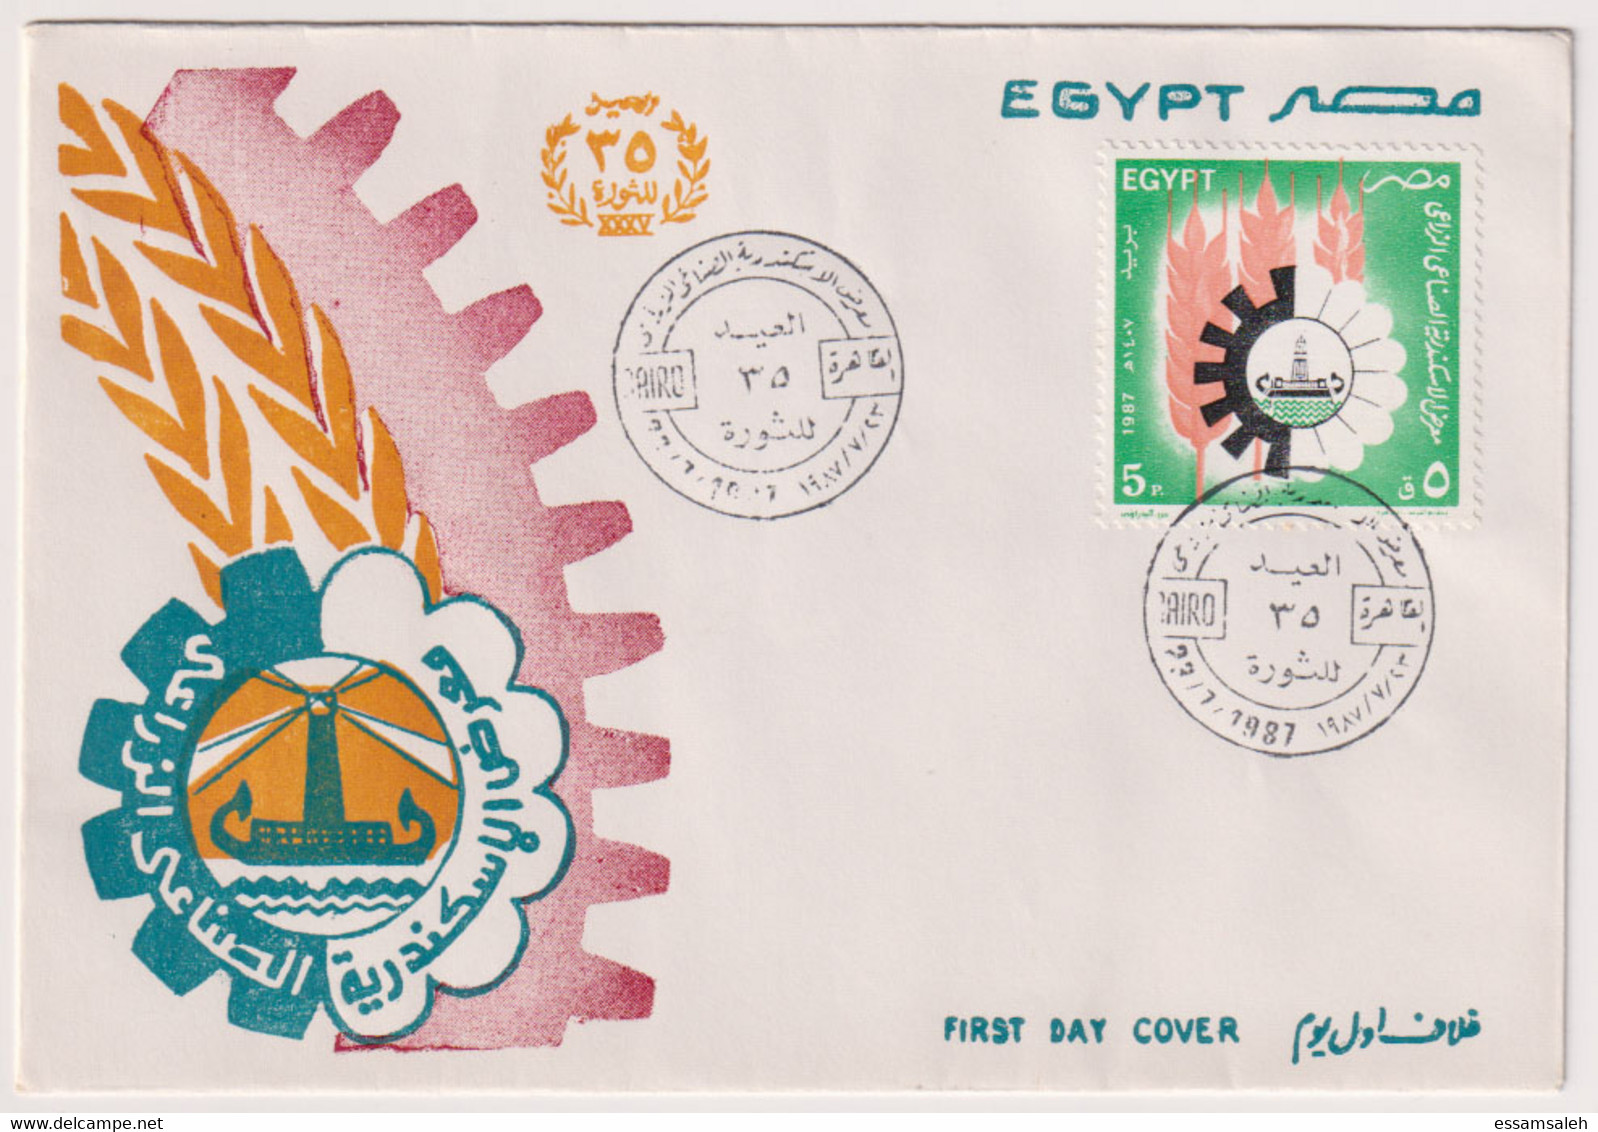 EGS30534 Egypt 1987 Illustrated FDC 35th Anniversary Of Revolution Of 1952 - Alexandria Fair - Covers & Documents